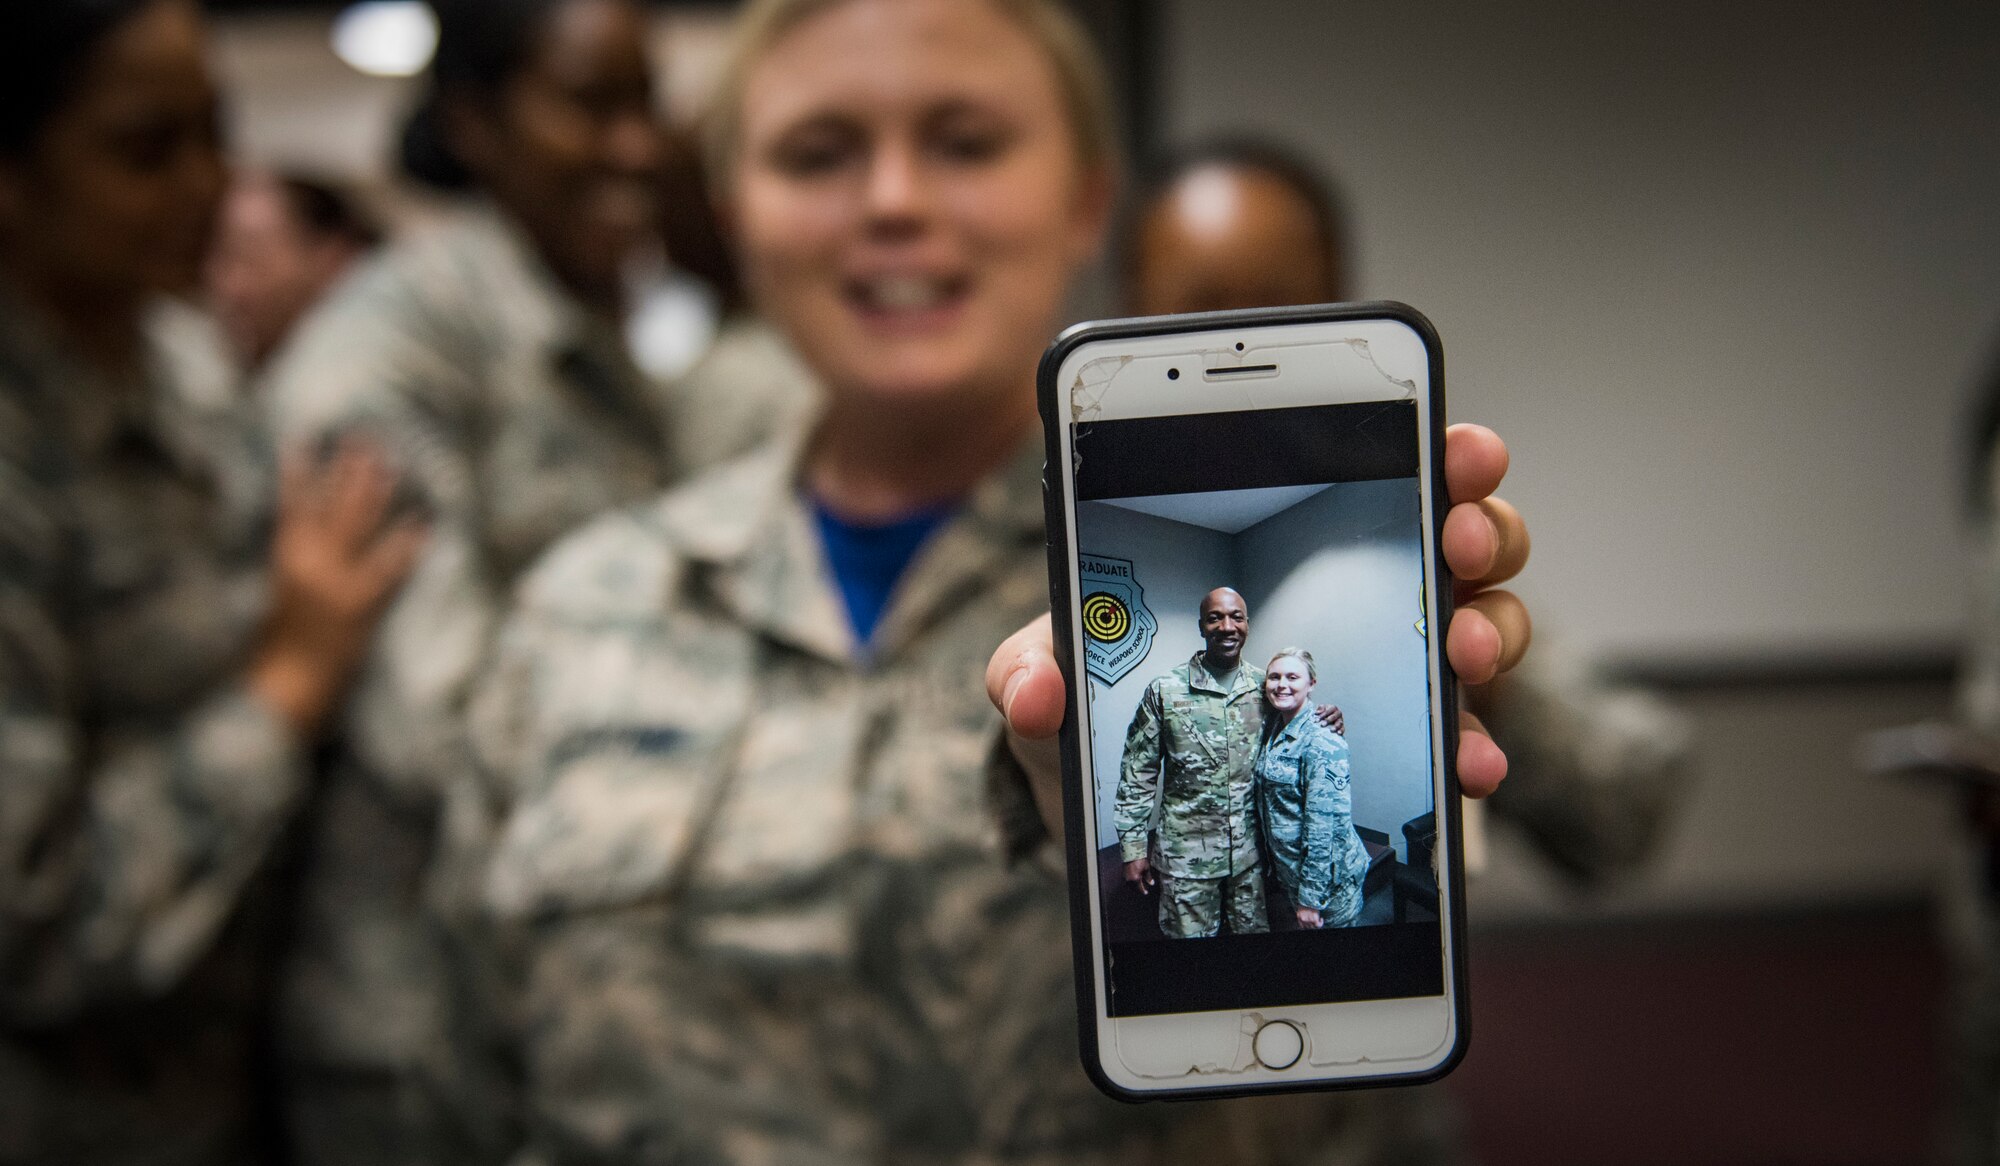 An Airman shows off her picture with Chief Master Sgt. of the Air Force Kaleth O. Wright Oct. 19, 2018, at Nellis Air Force Base, Nevada. Wright met with Airmen from all around the base. (U.S. Air Force photo by Airman 1st Class Andrew D. Sarver)